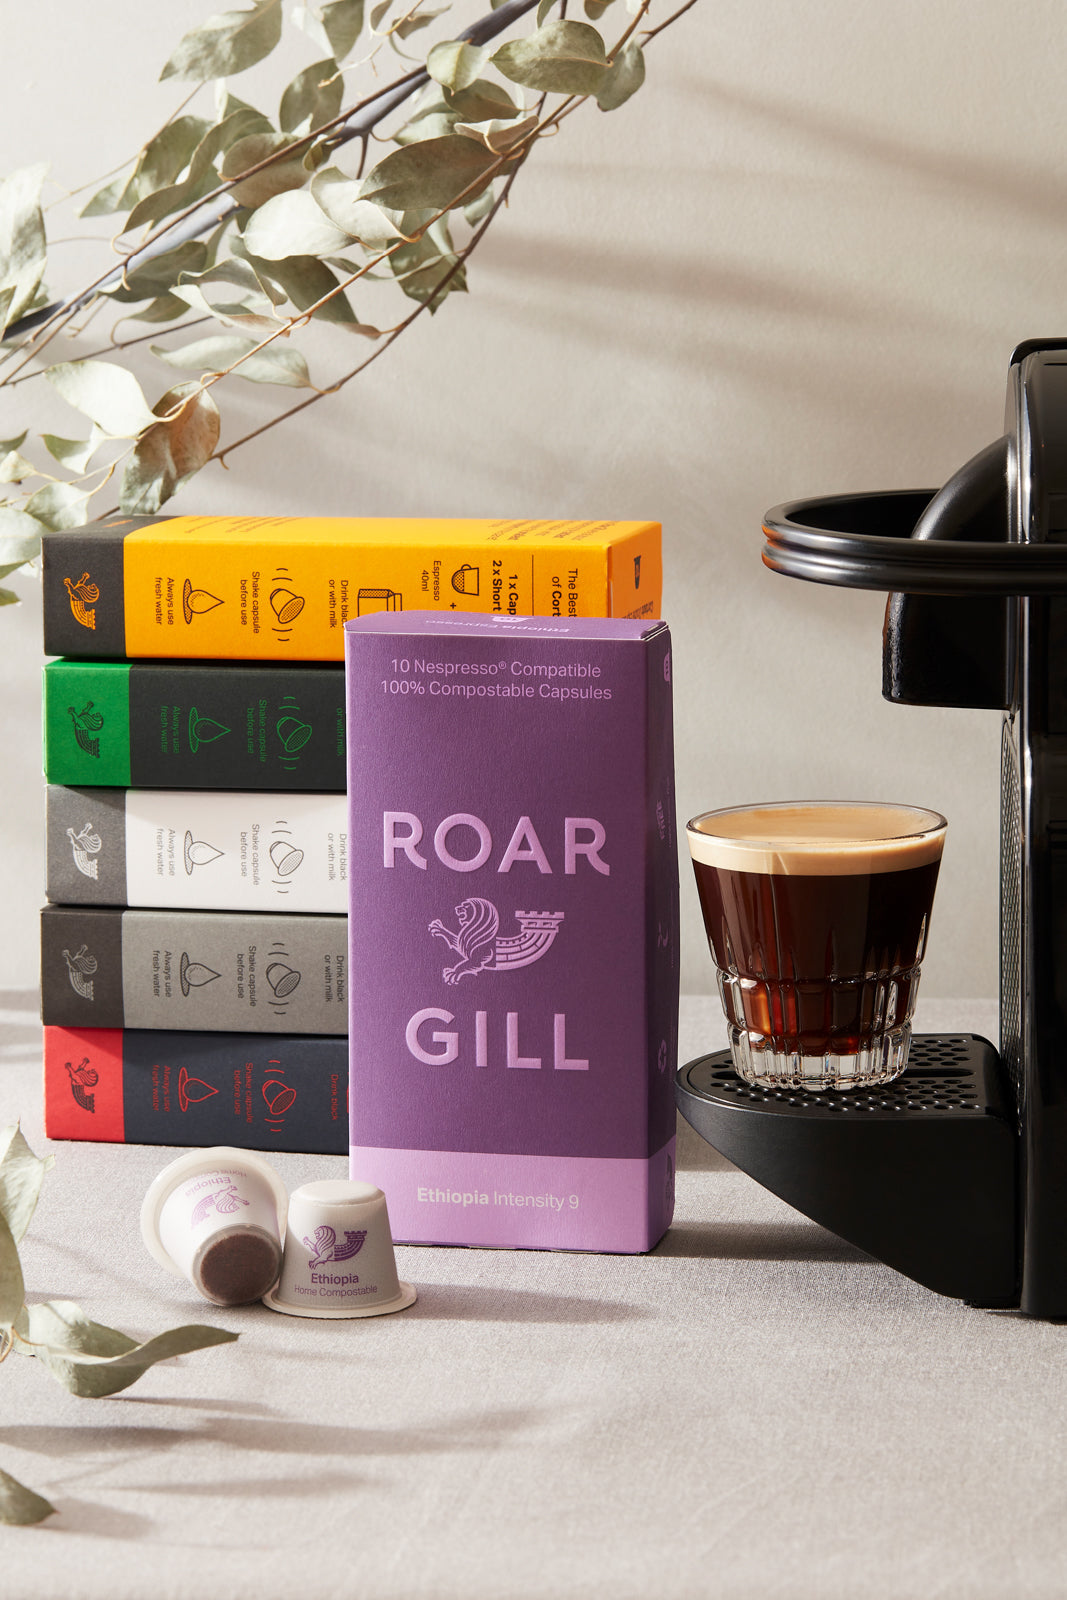 Roar Gill Home Compostable Pod Discovery Pack. Includes All Six Coffee Styles.